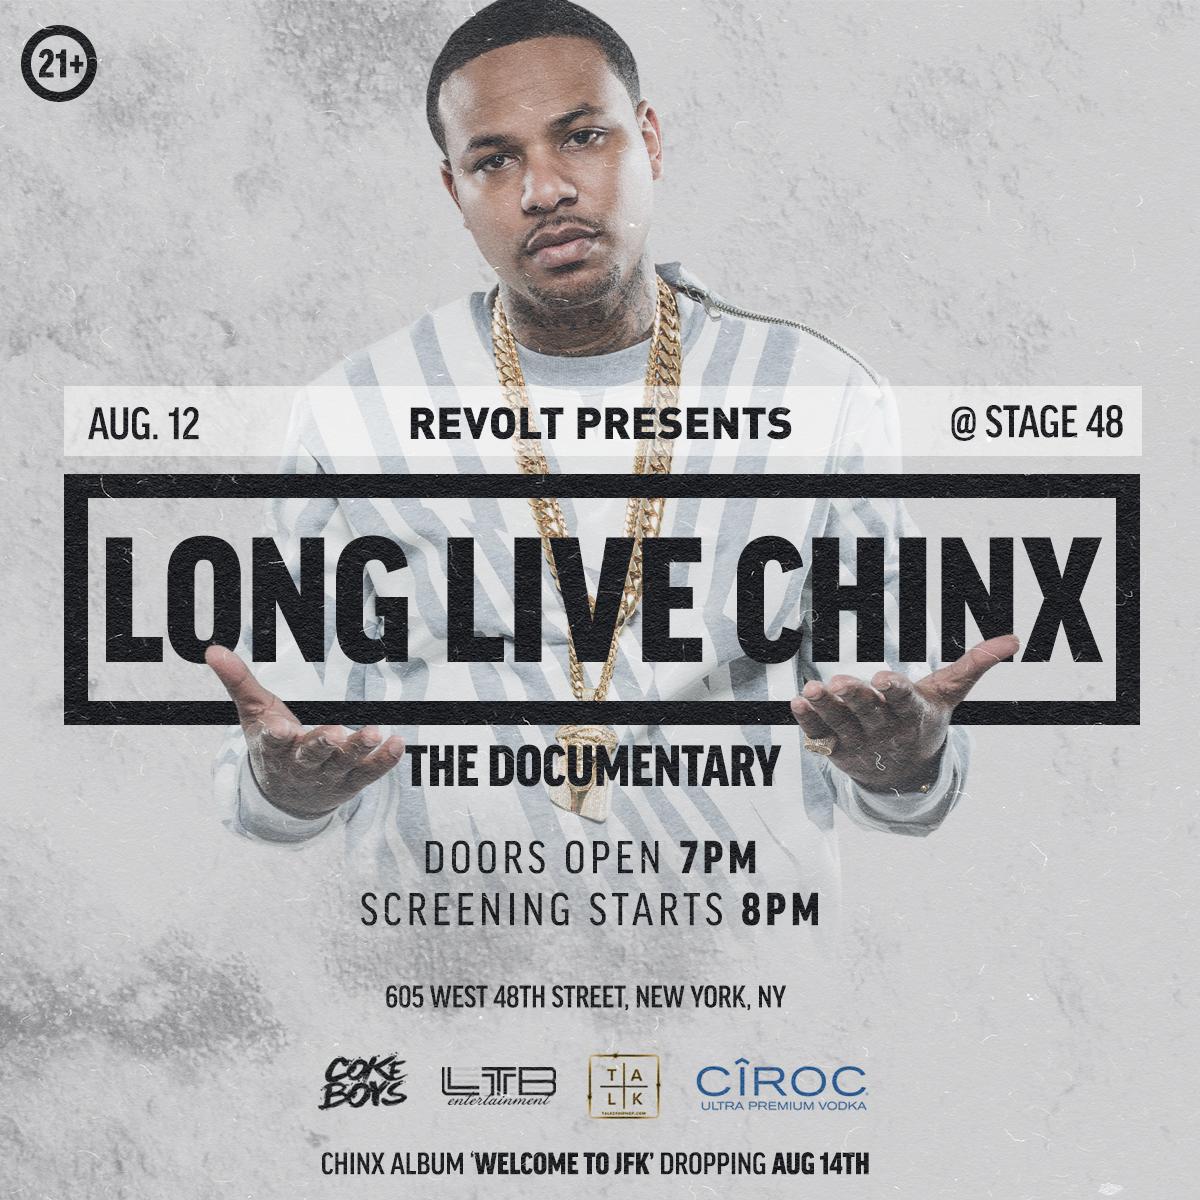 RT @RevoltTV: Join us for the screening of #LongLiveChinx tonight at Stage 48: http://t.co/zt0mWXAi4t RSVP ChinxDocumentary[@]gmail http://…